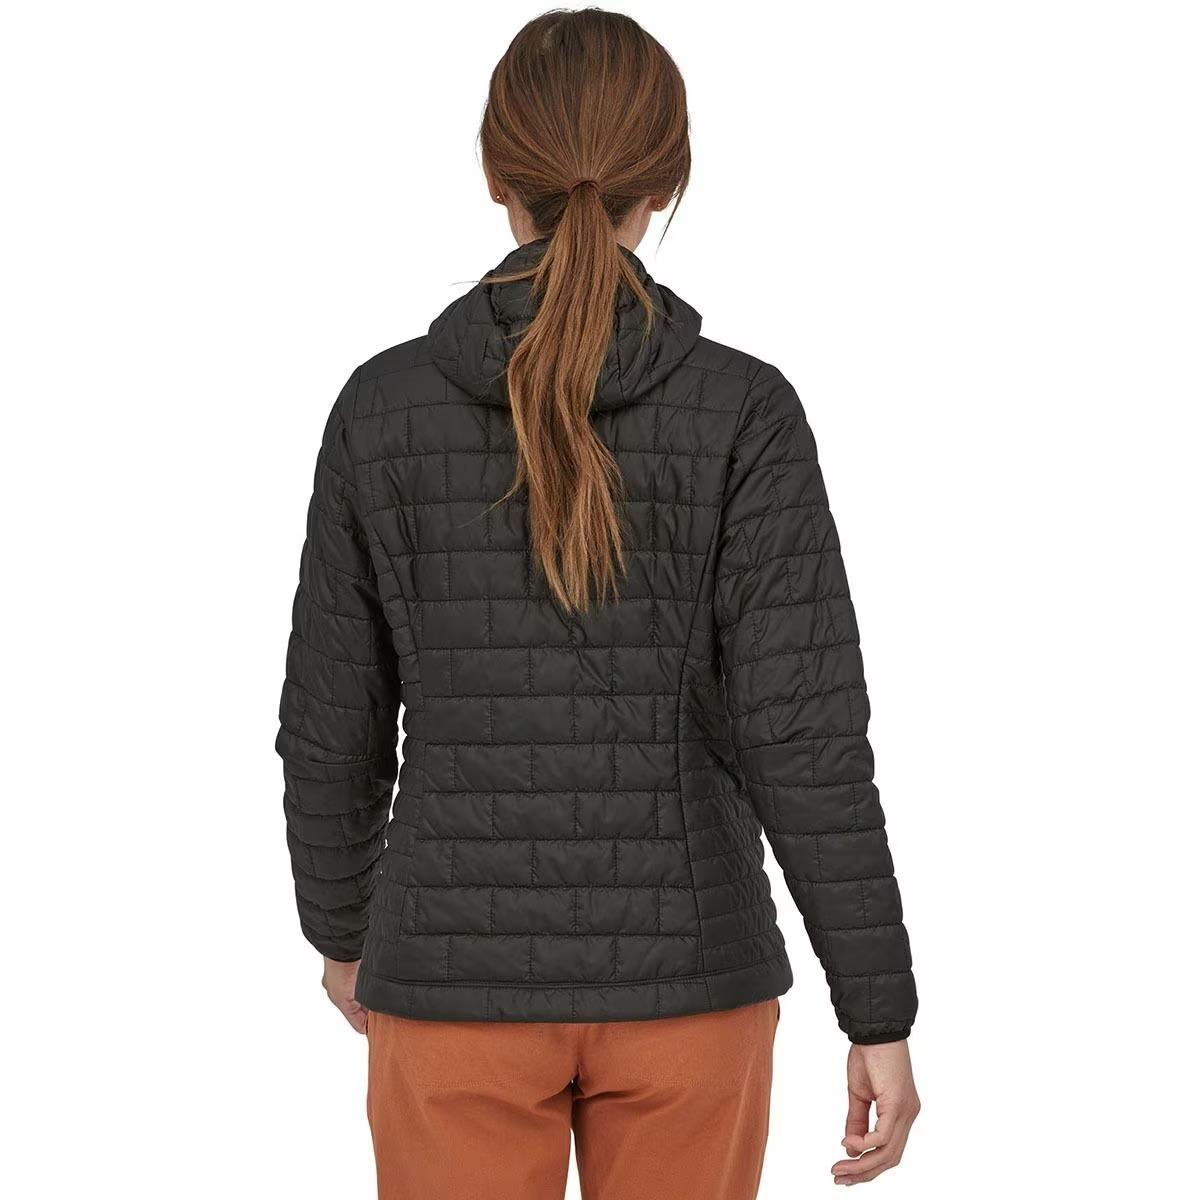 Patagonia Nano Puff Hooded Insulated Jacket - Women's